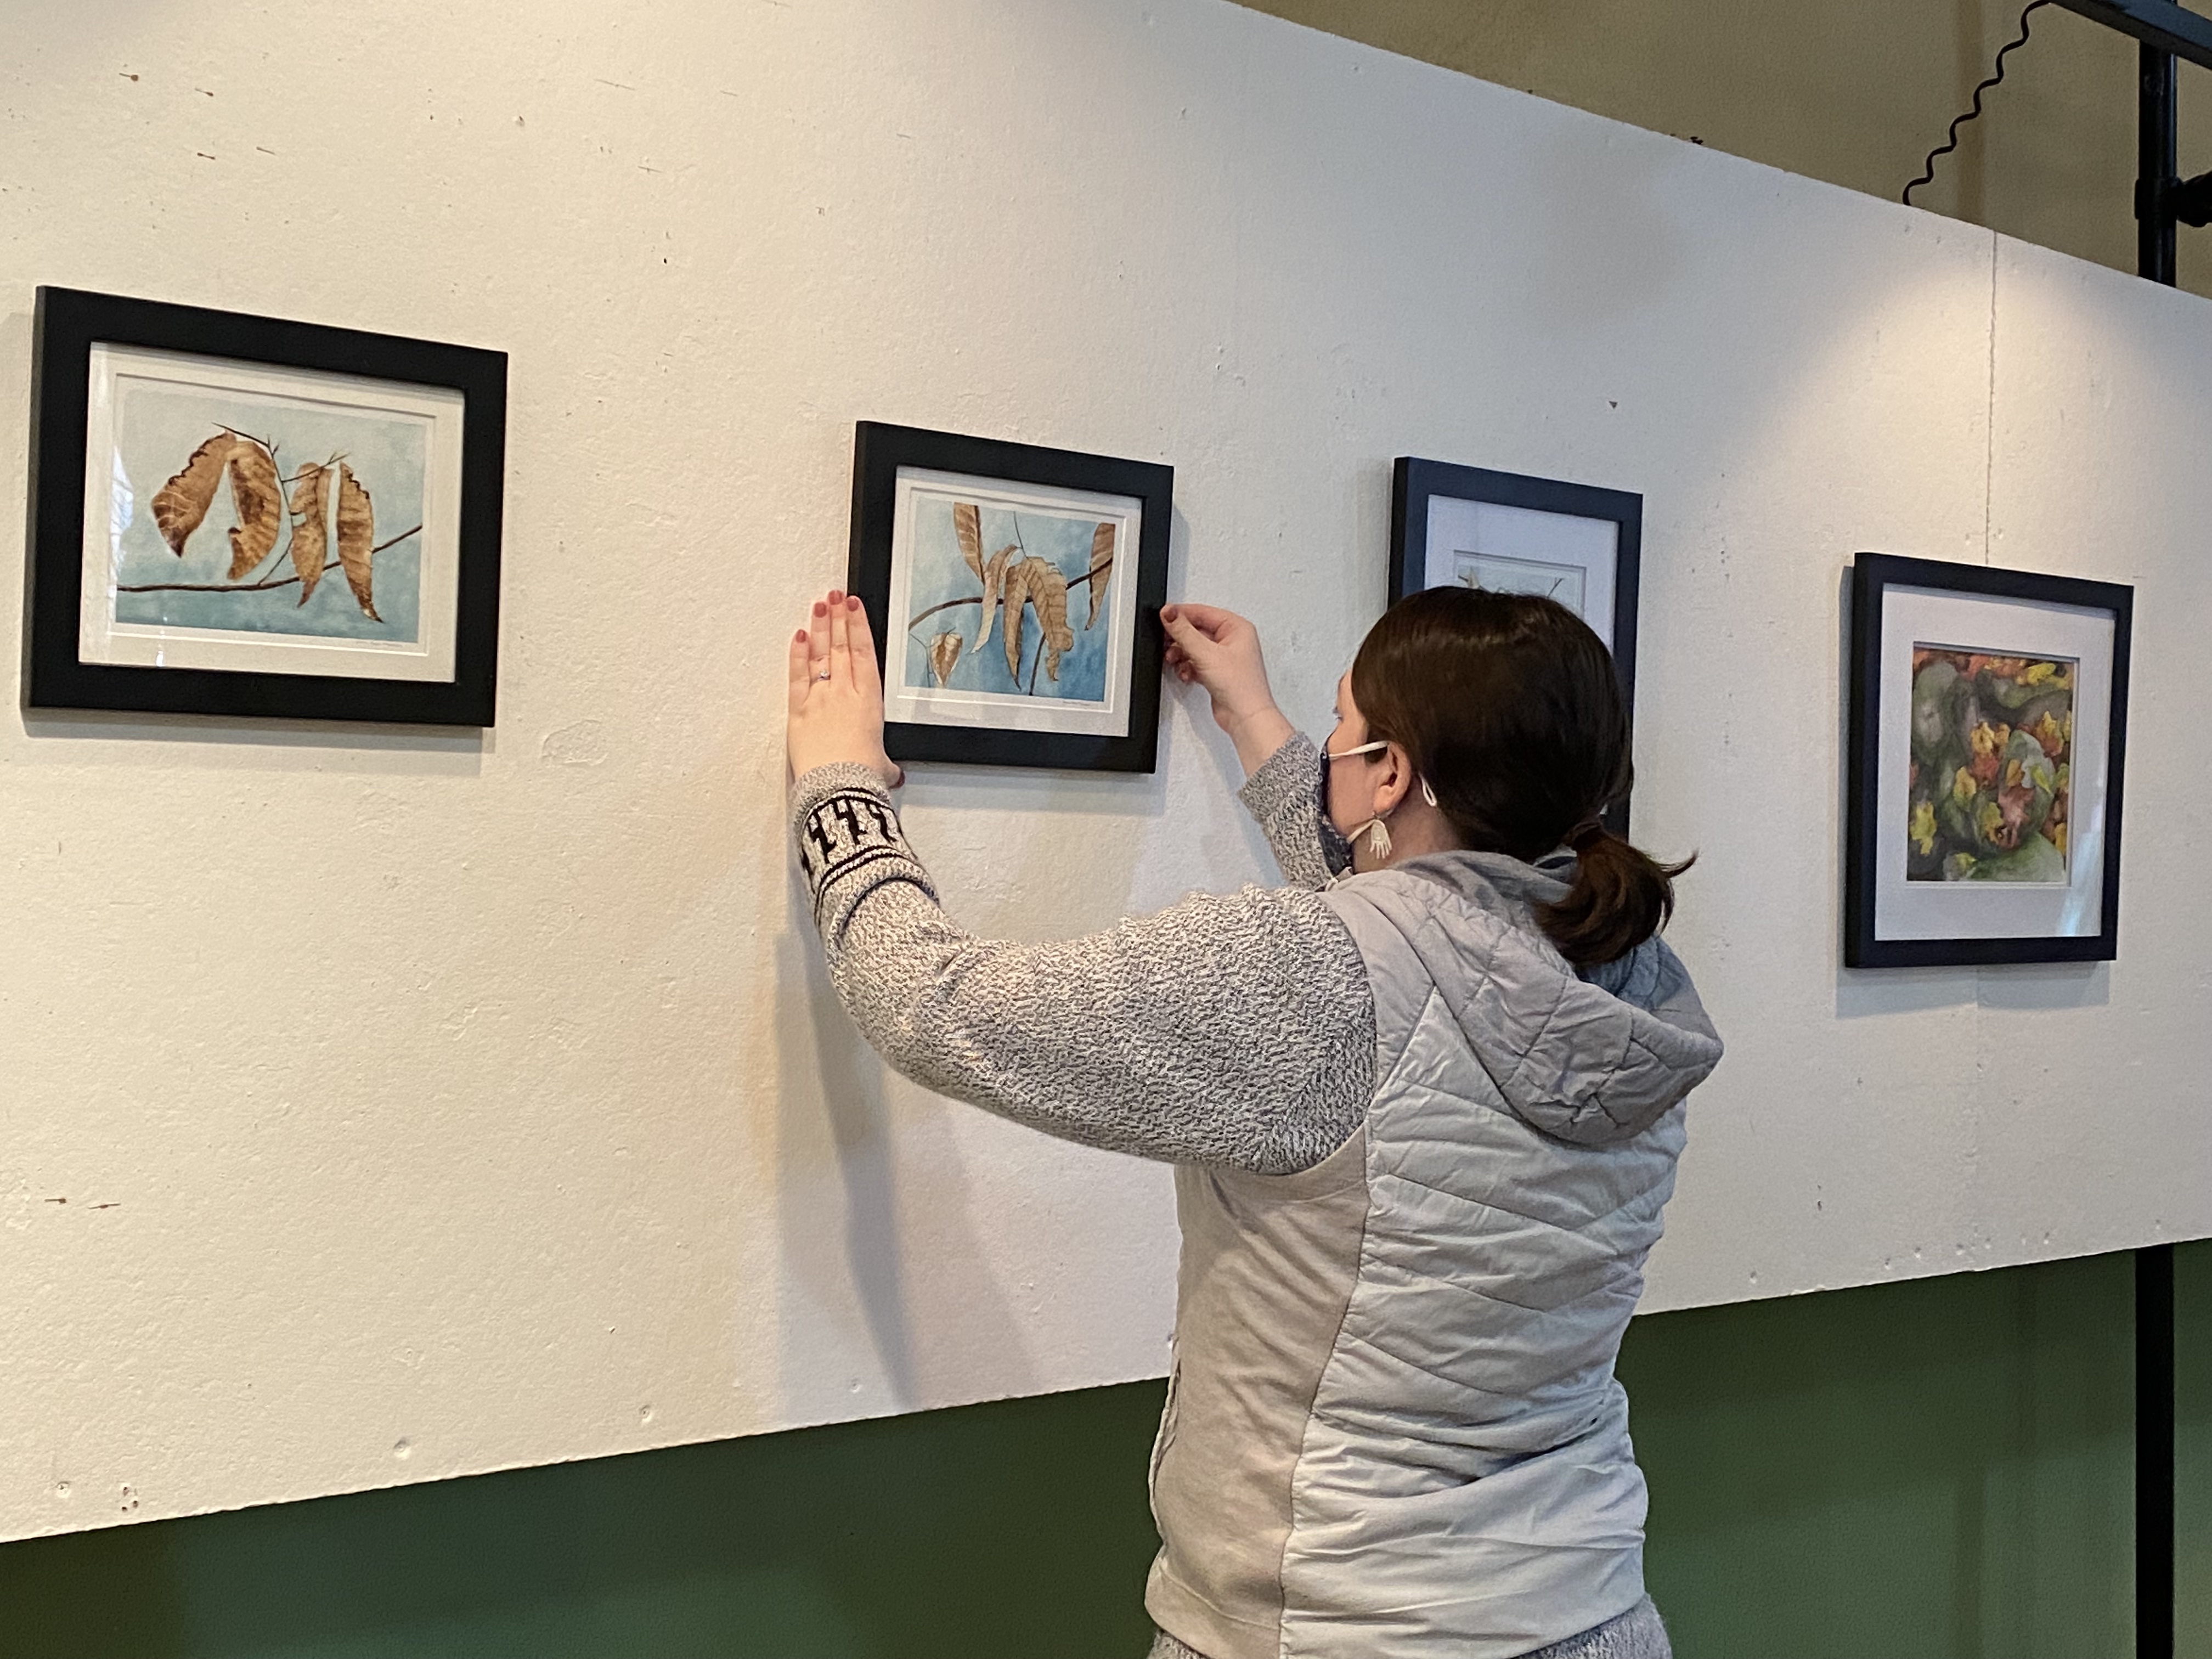 Artist Amy Hook Therrien, in knobby off white sweater with hoodie, faces the display panel in LNT Gallery space, back to the camera, to position watercolor with 4 brown leaves falling from a branch against a fall-blue sky